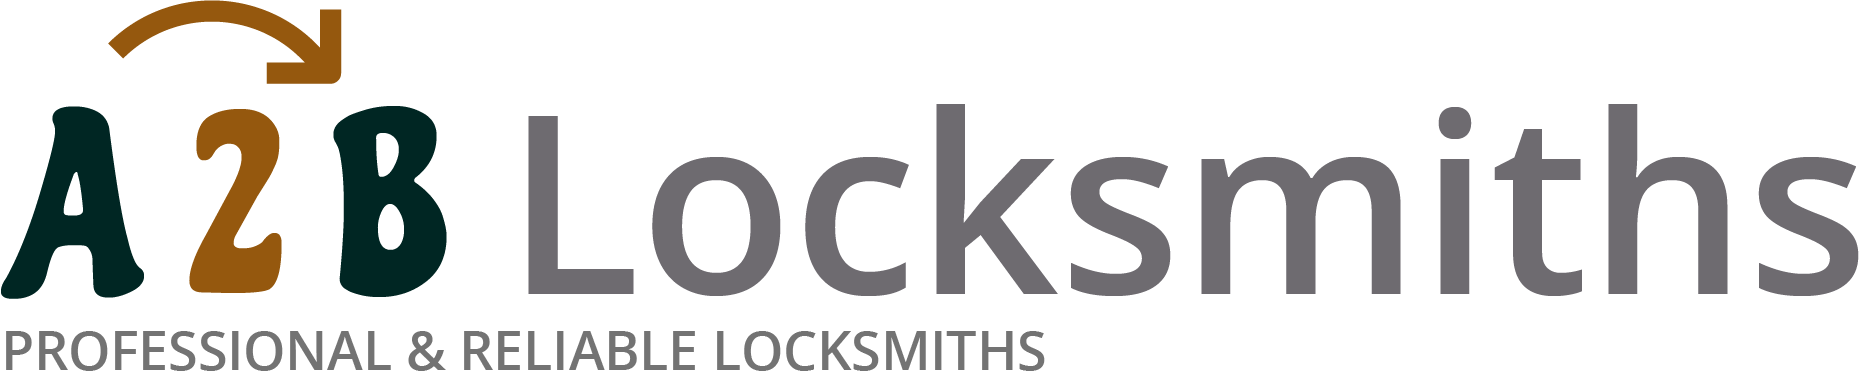 If you are locked out of house in Barnet, our 24/7 local emergency locksmith services can help you.